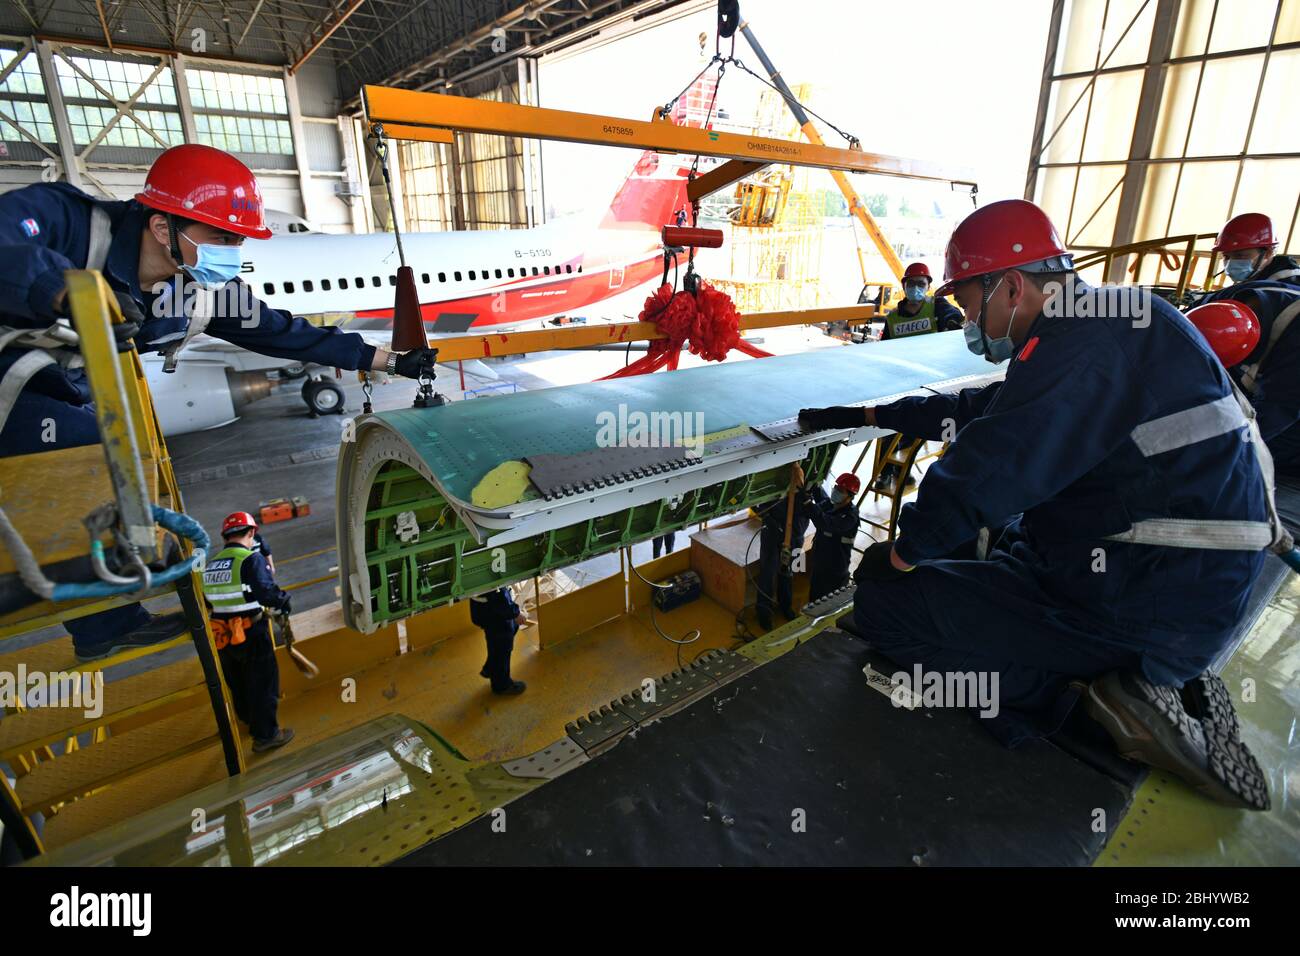 (200428) -- JINAN, April 28, 2020 (Xinhua) -- Technicians refit an airliner at Taikoo (Shandong) Aircraft Engineering Company Limited (STAECO) in Jinan, east China's Shandong Province, April 27, 2020. The COVID-19 pandemic has led to a significant decrease in airline travel and passenger revenue. Since its production recovered on Feb. 10, STAECO has been offering Passenger-to-Freighter (PTF) solutions for airline operators which need more cargo planes to address this market change. So far, the company has accomplished three PTF conversions for its clients. (Xinhua/Zhu Zheng) Stock Photo